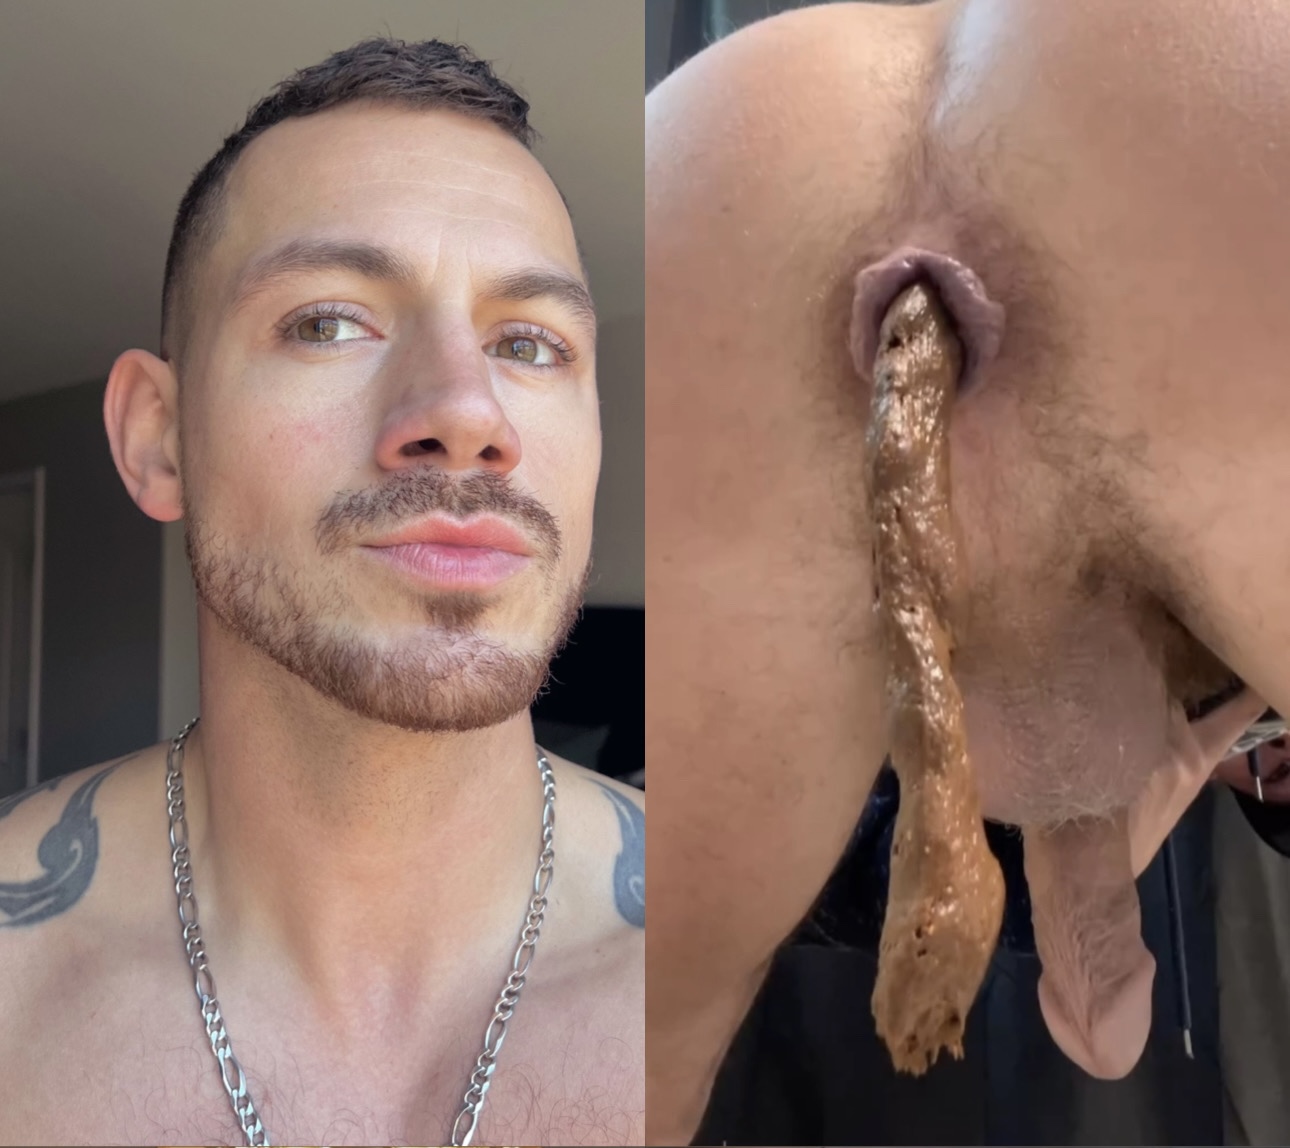 His anal lips *FLARE* as he poops